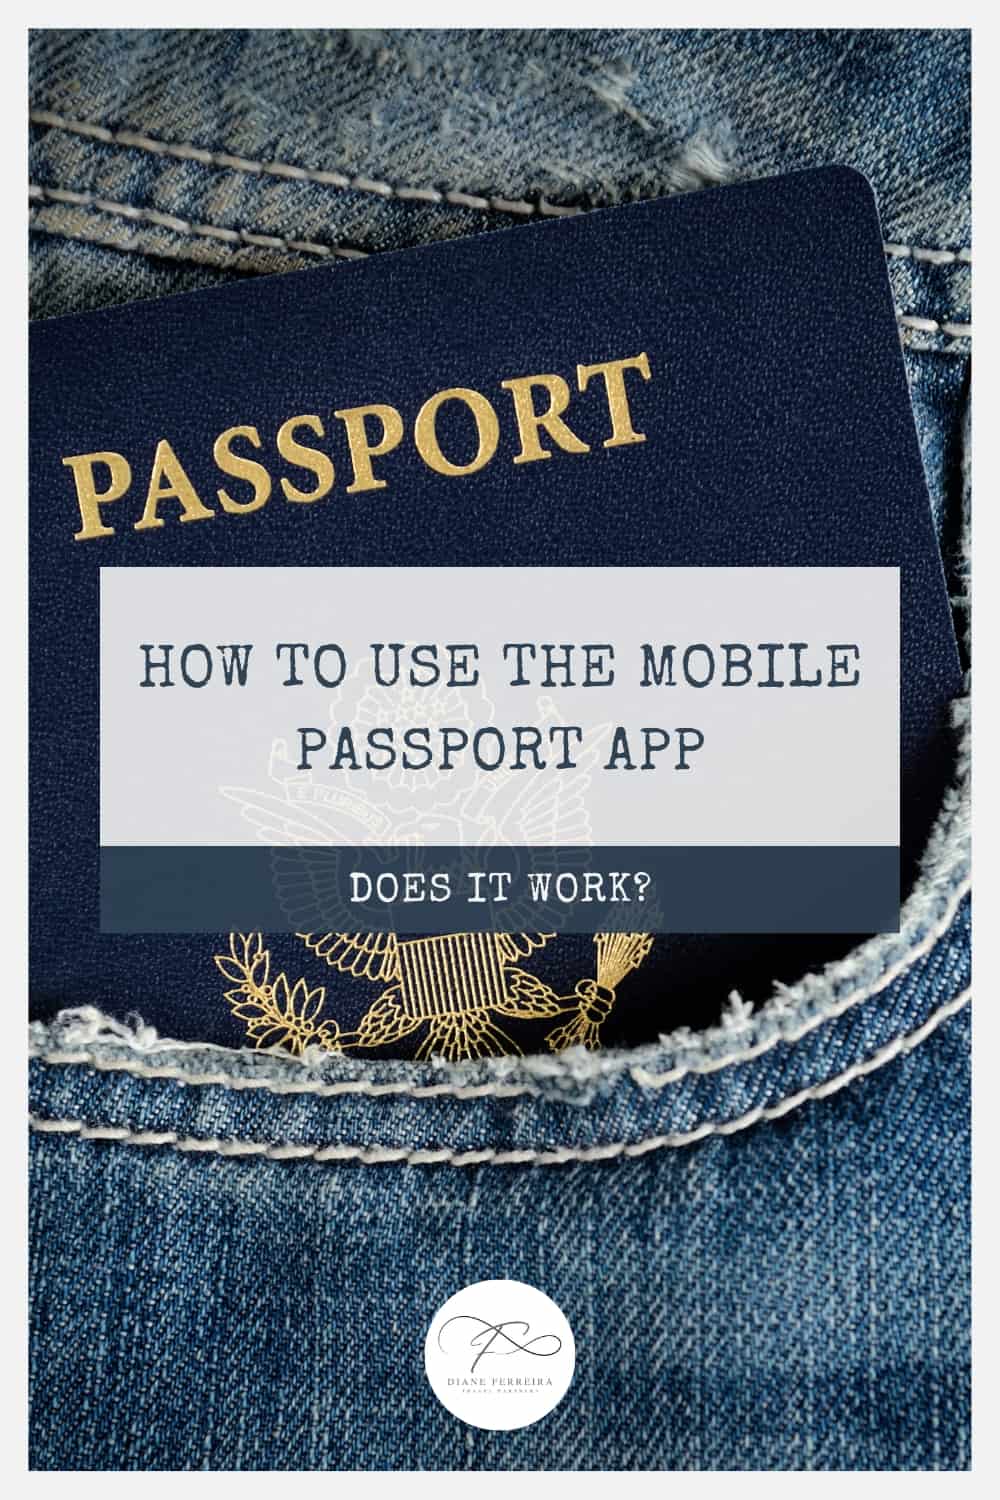 Passport in denim pocket with text that says How to Use the Mobile Passport App - Does it Work?